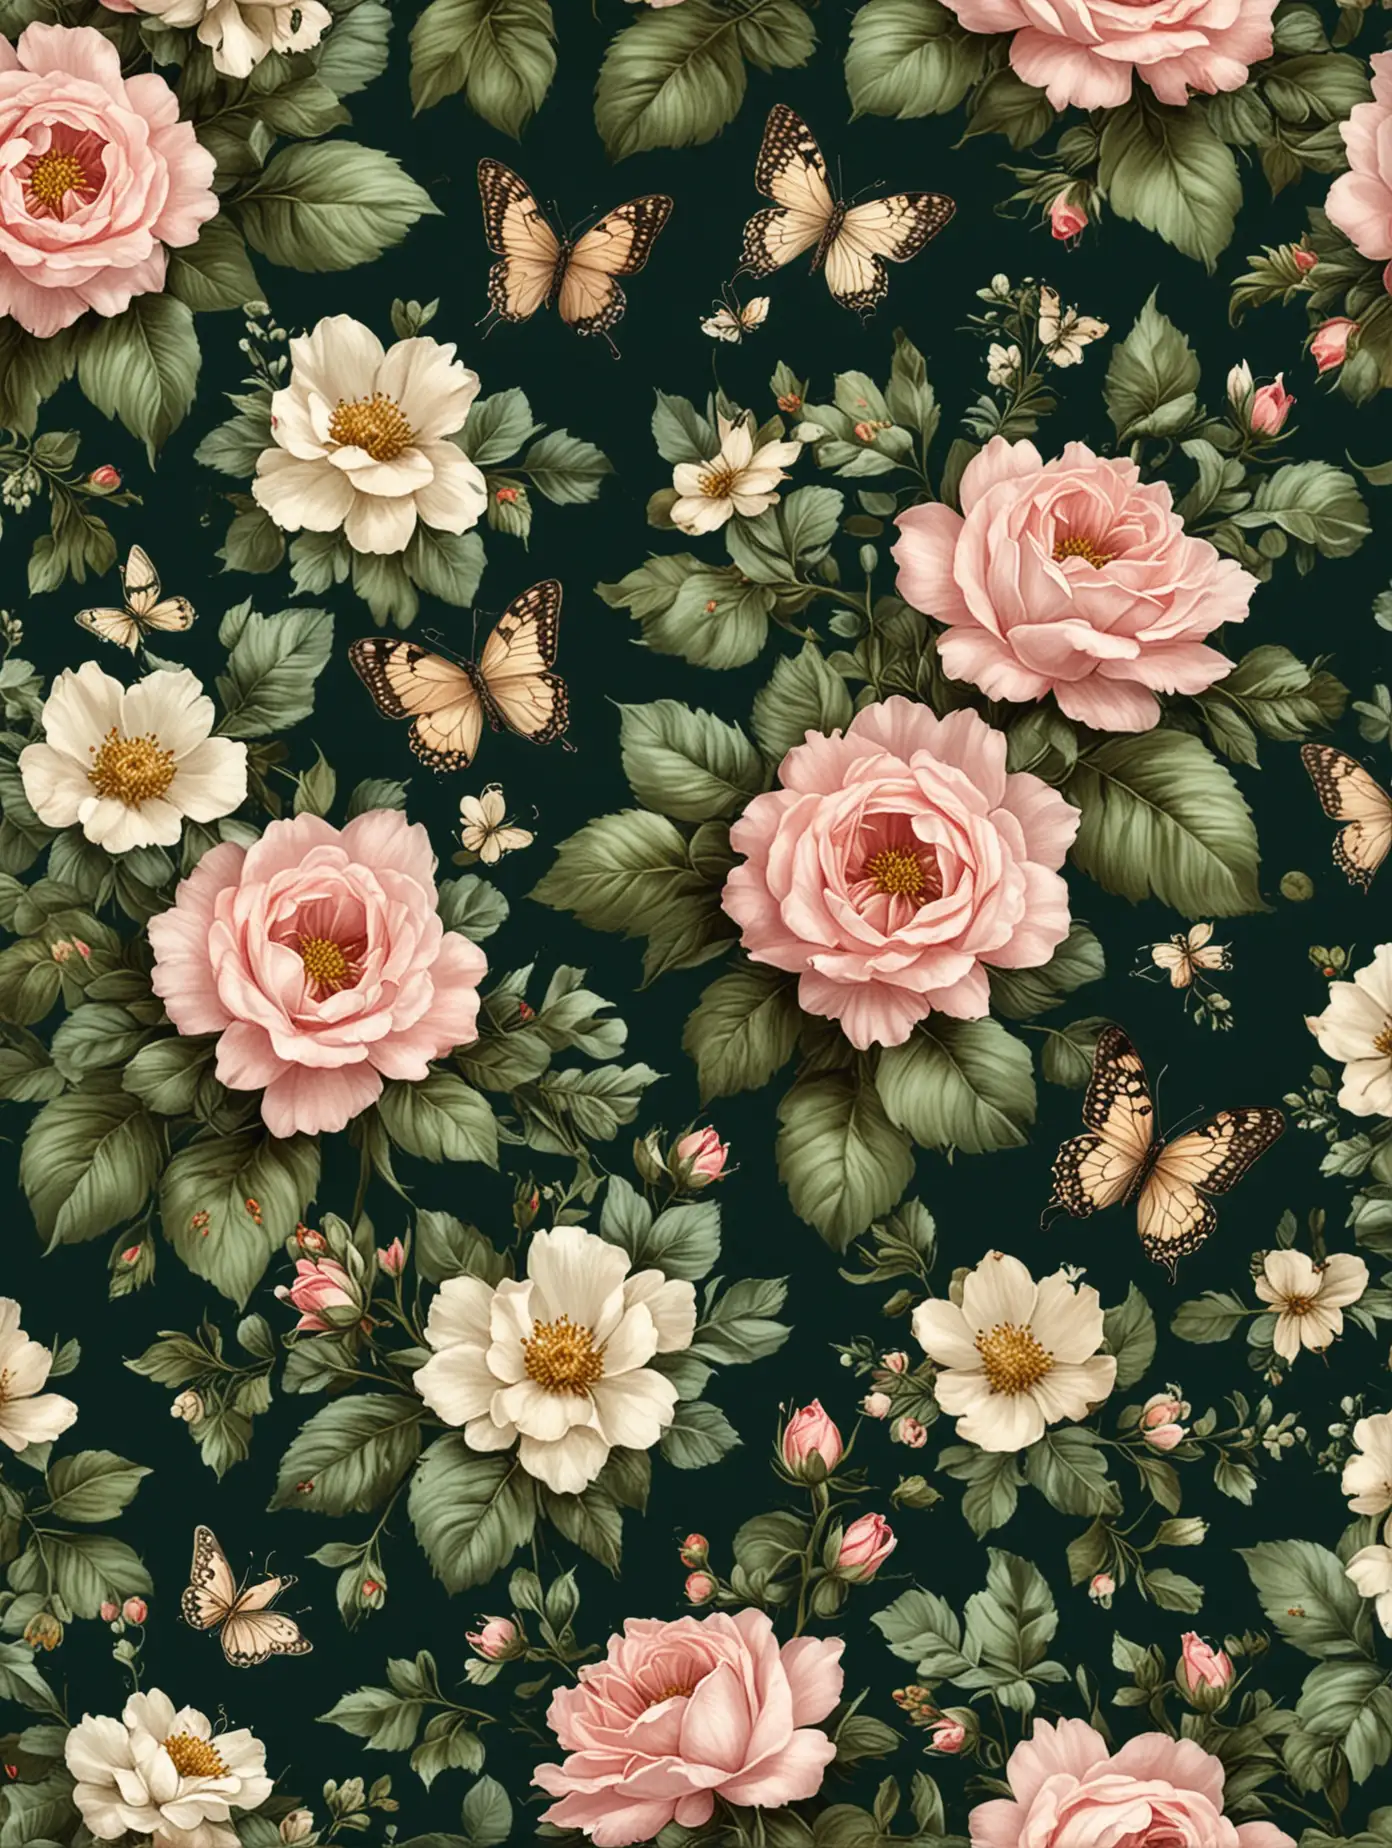 Vintage Rose and Butterfly Seamless Pattern in Oil Painting Style